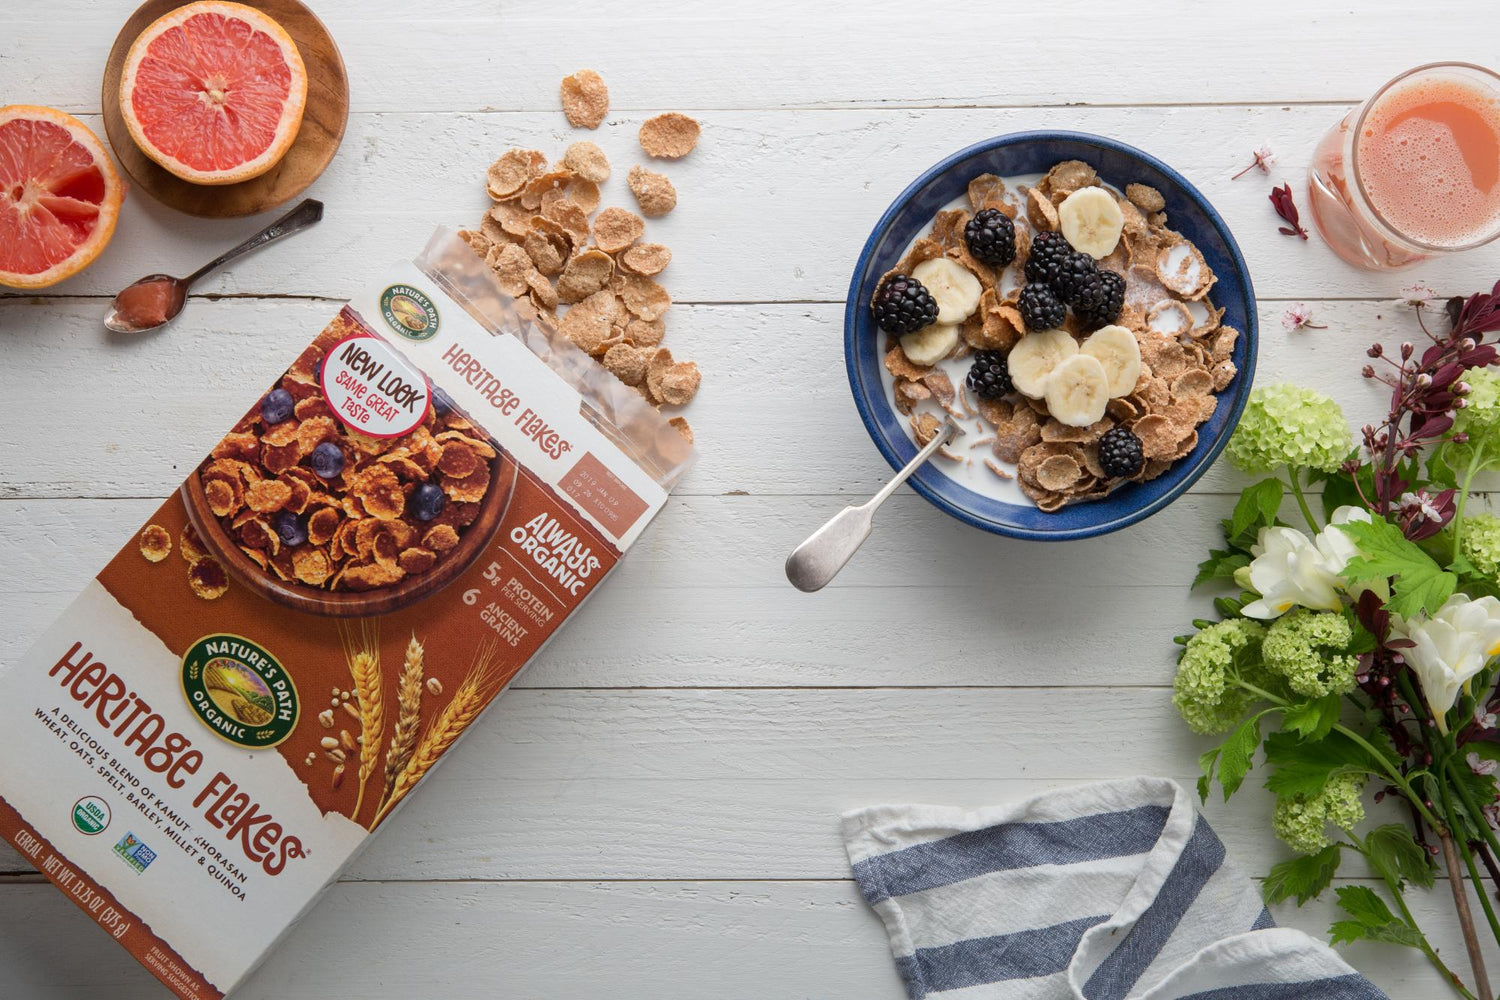 SAVE $1.00 ON HERTIAGE FLAKES ORGANIC CEREAL